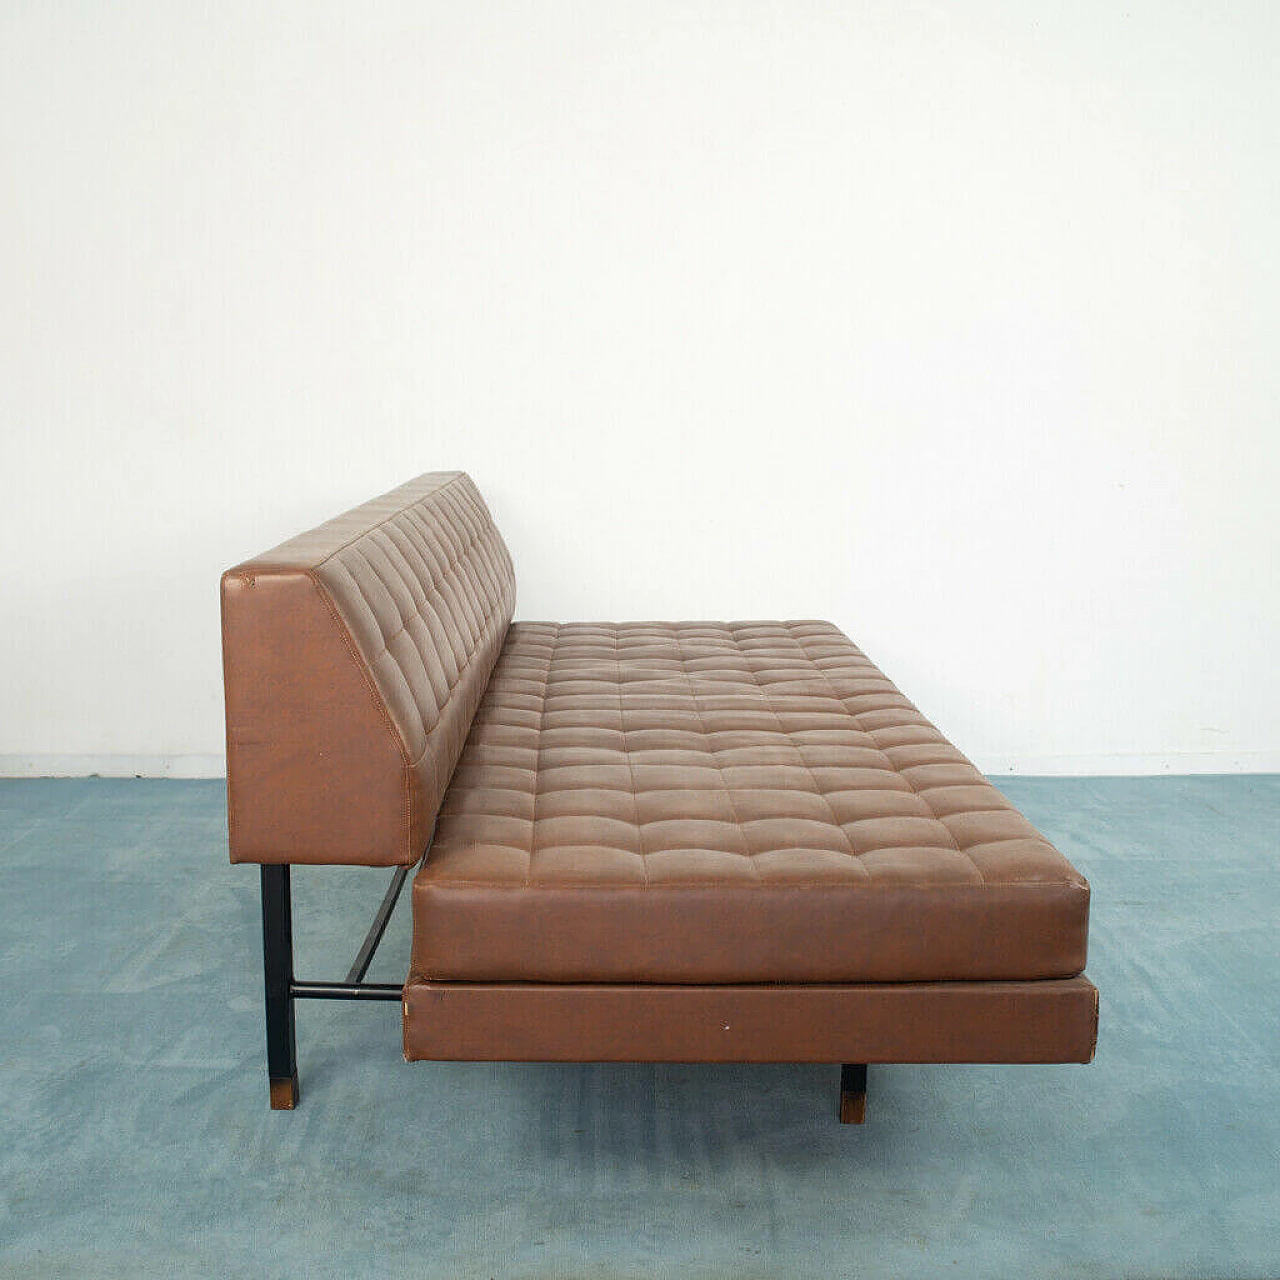 3-Seater sofa or daybed by Marco Zanuso for Flexform, 1950s 1183333